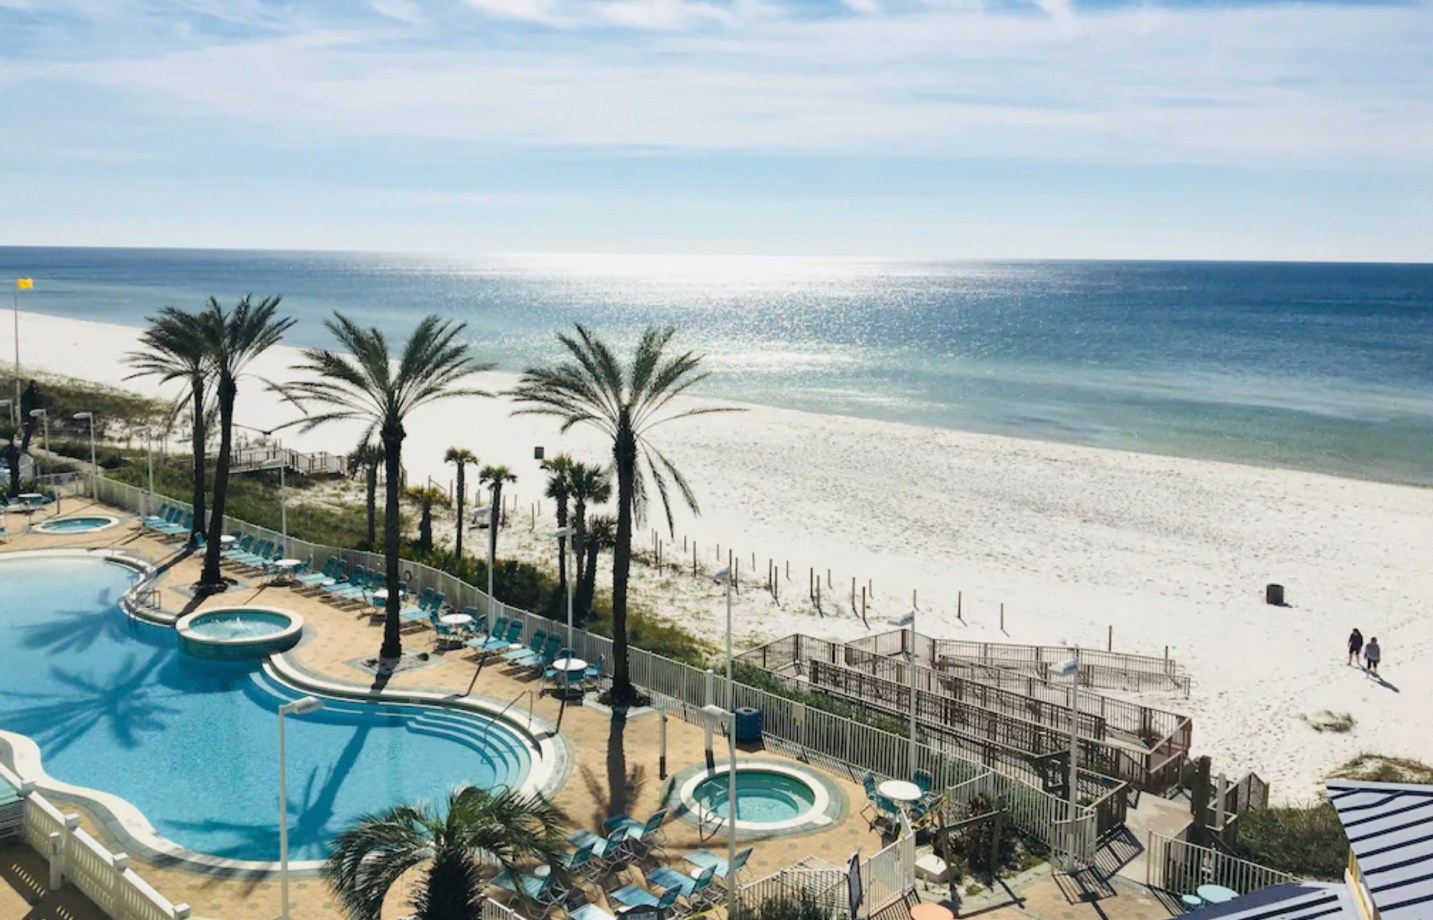 View of pool and beach from Panama City Beach vacation home